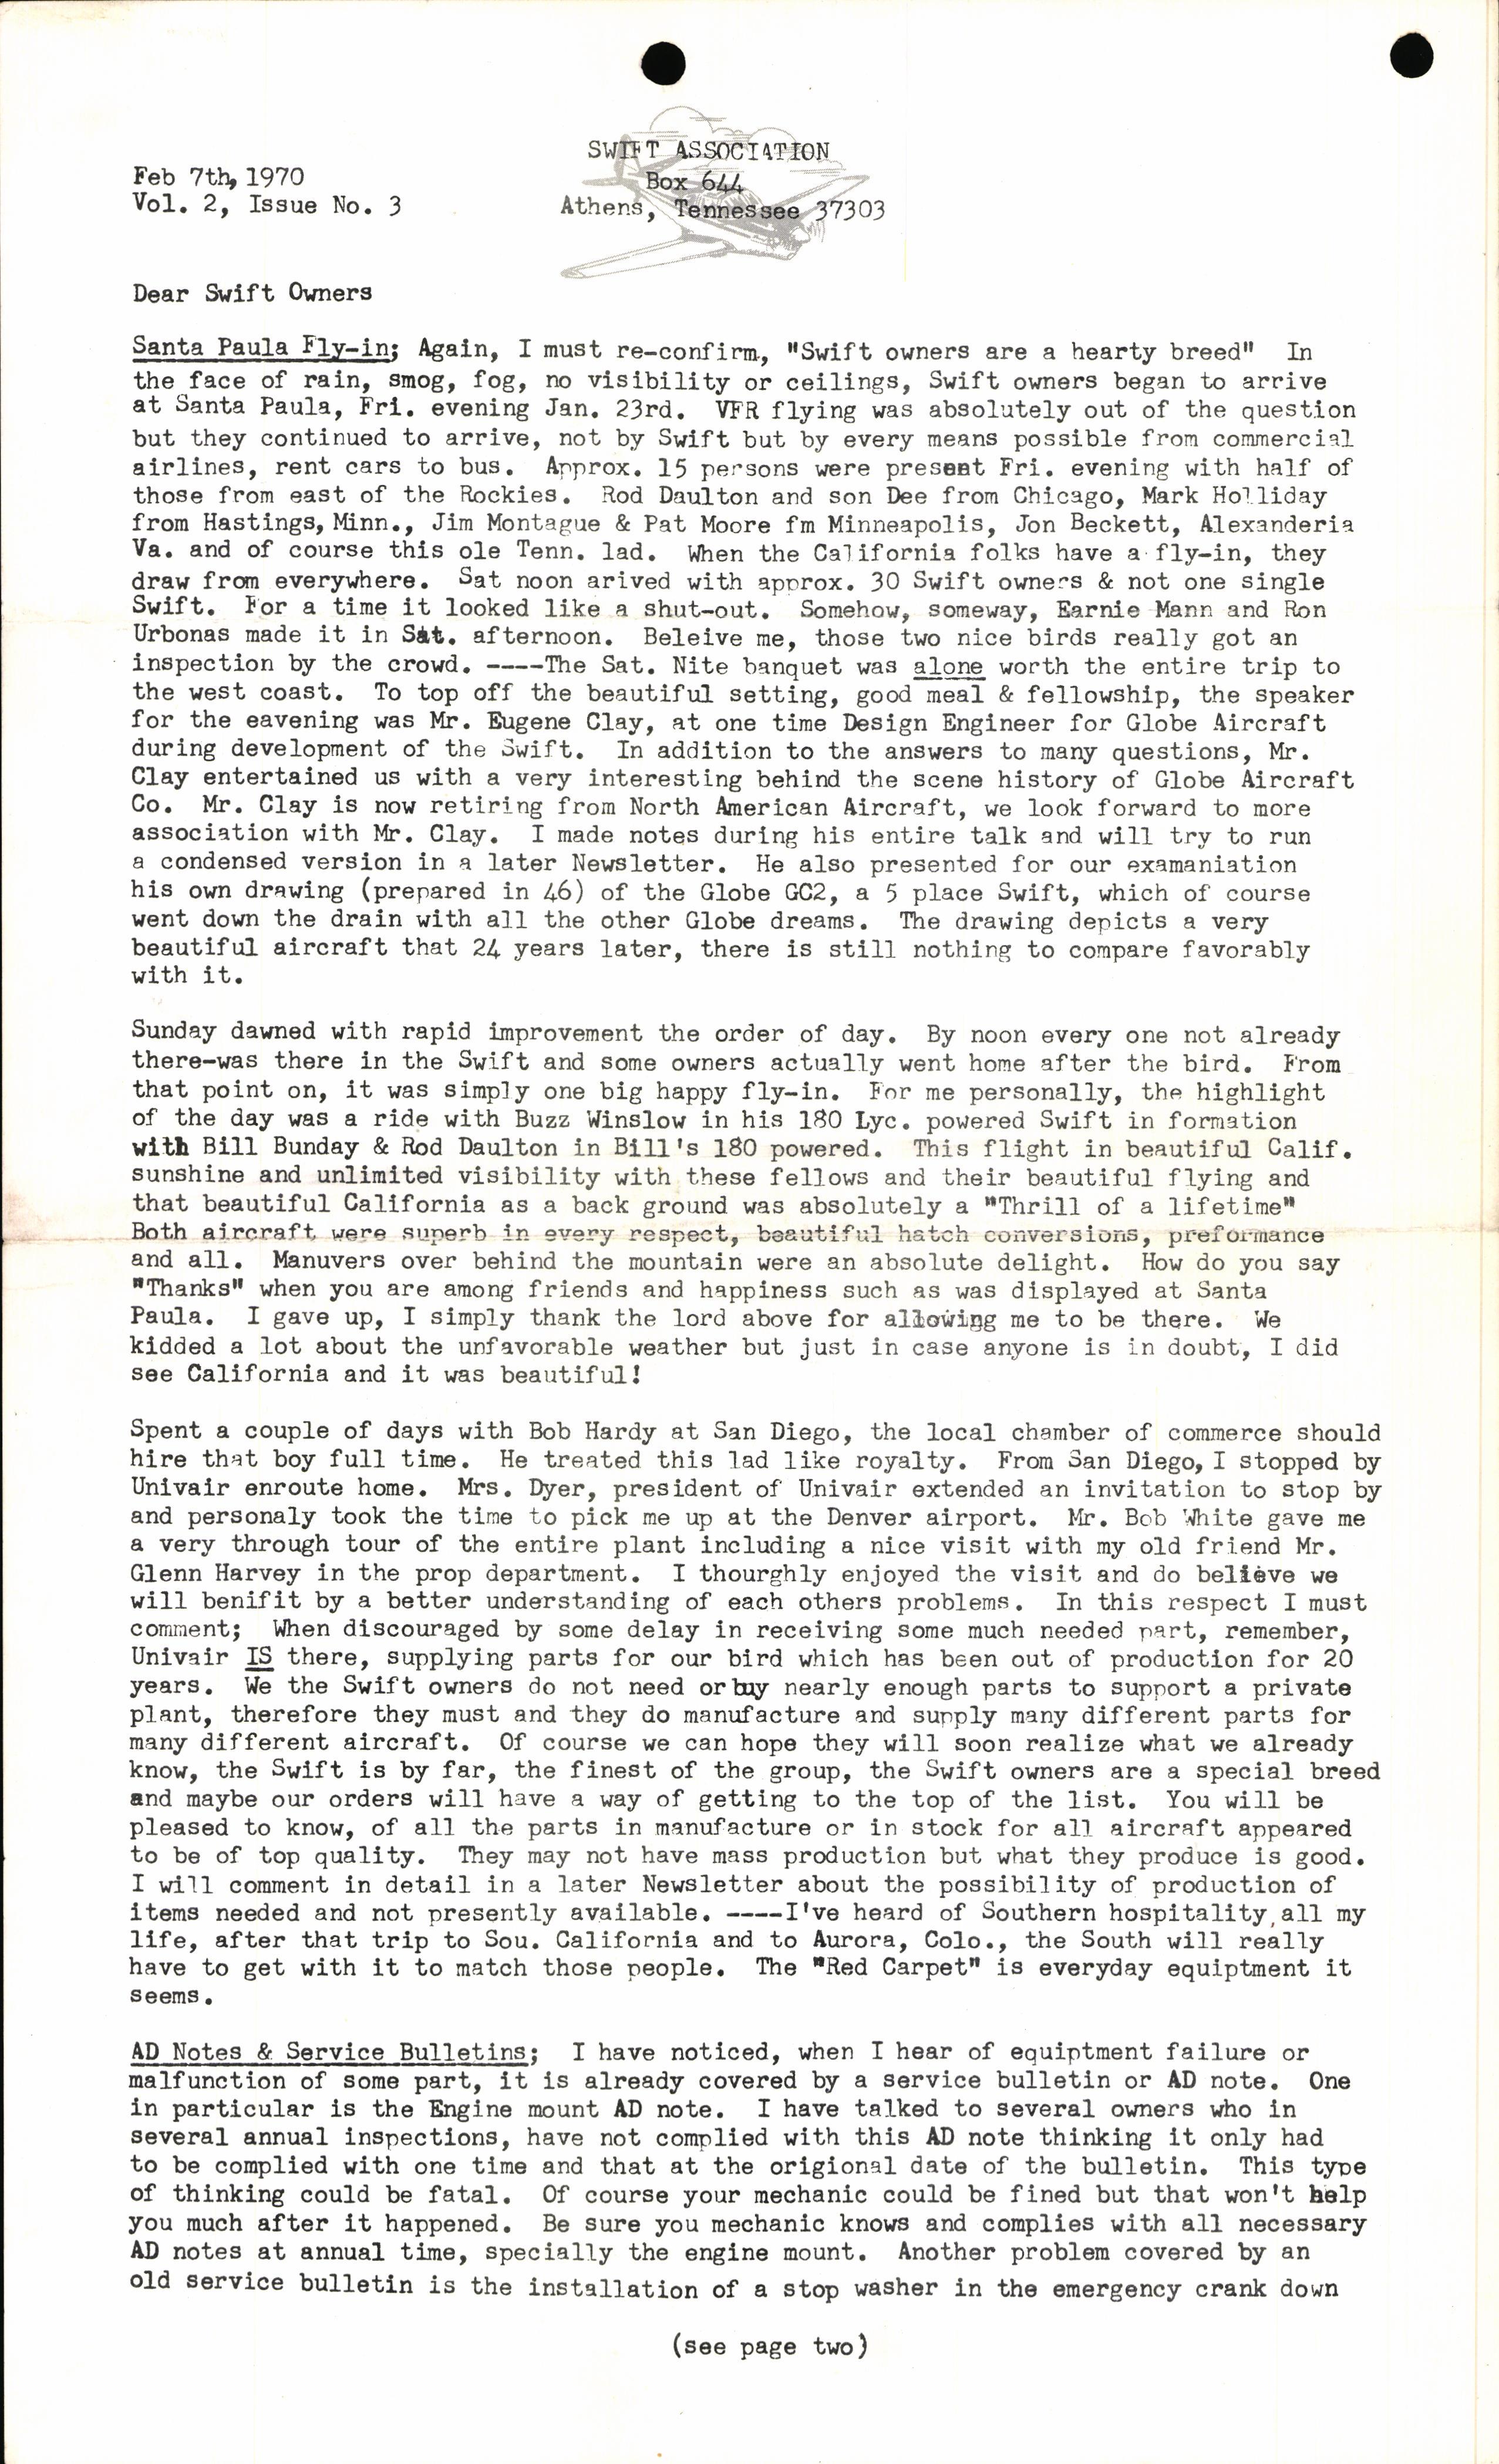 Sample page 1 from AirCorps Library document: February 1970